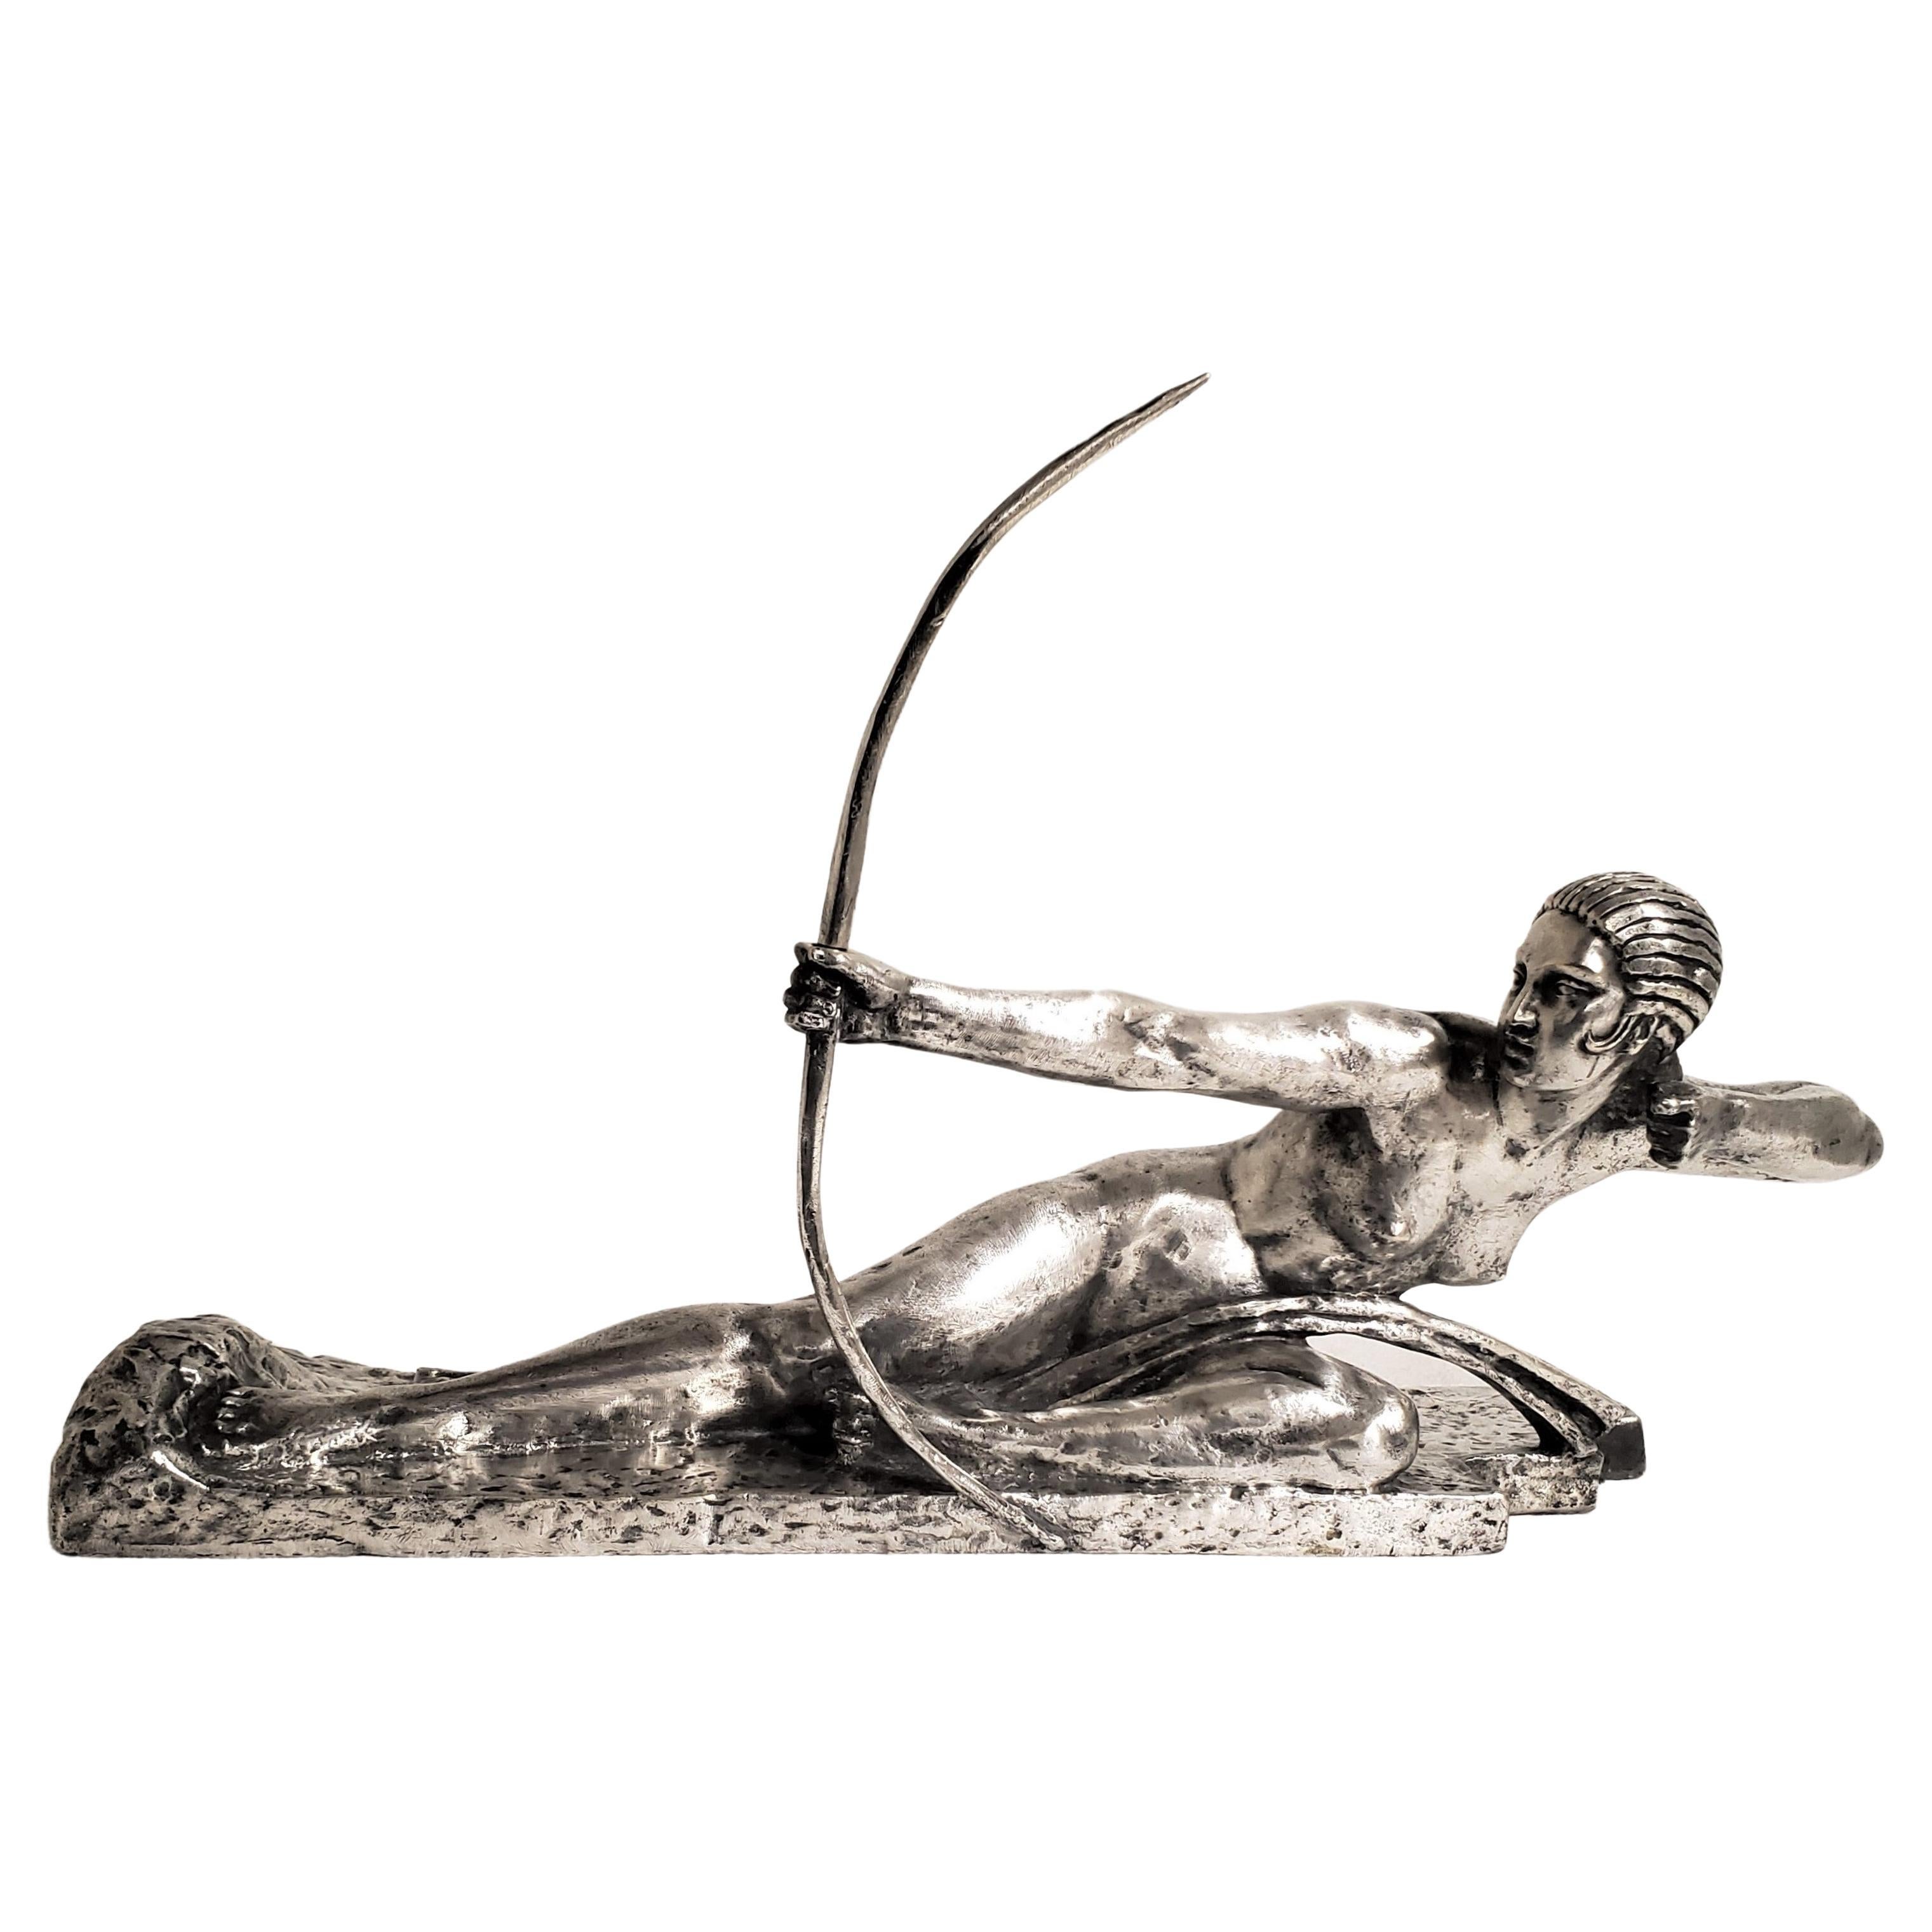 A silvered bronze sculpture of an Amazon woman, nude and with bow, signed by the artist Marcel-Andre Bouraine, cast by Susse Freres in the lost wax technique 